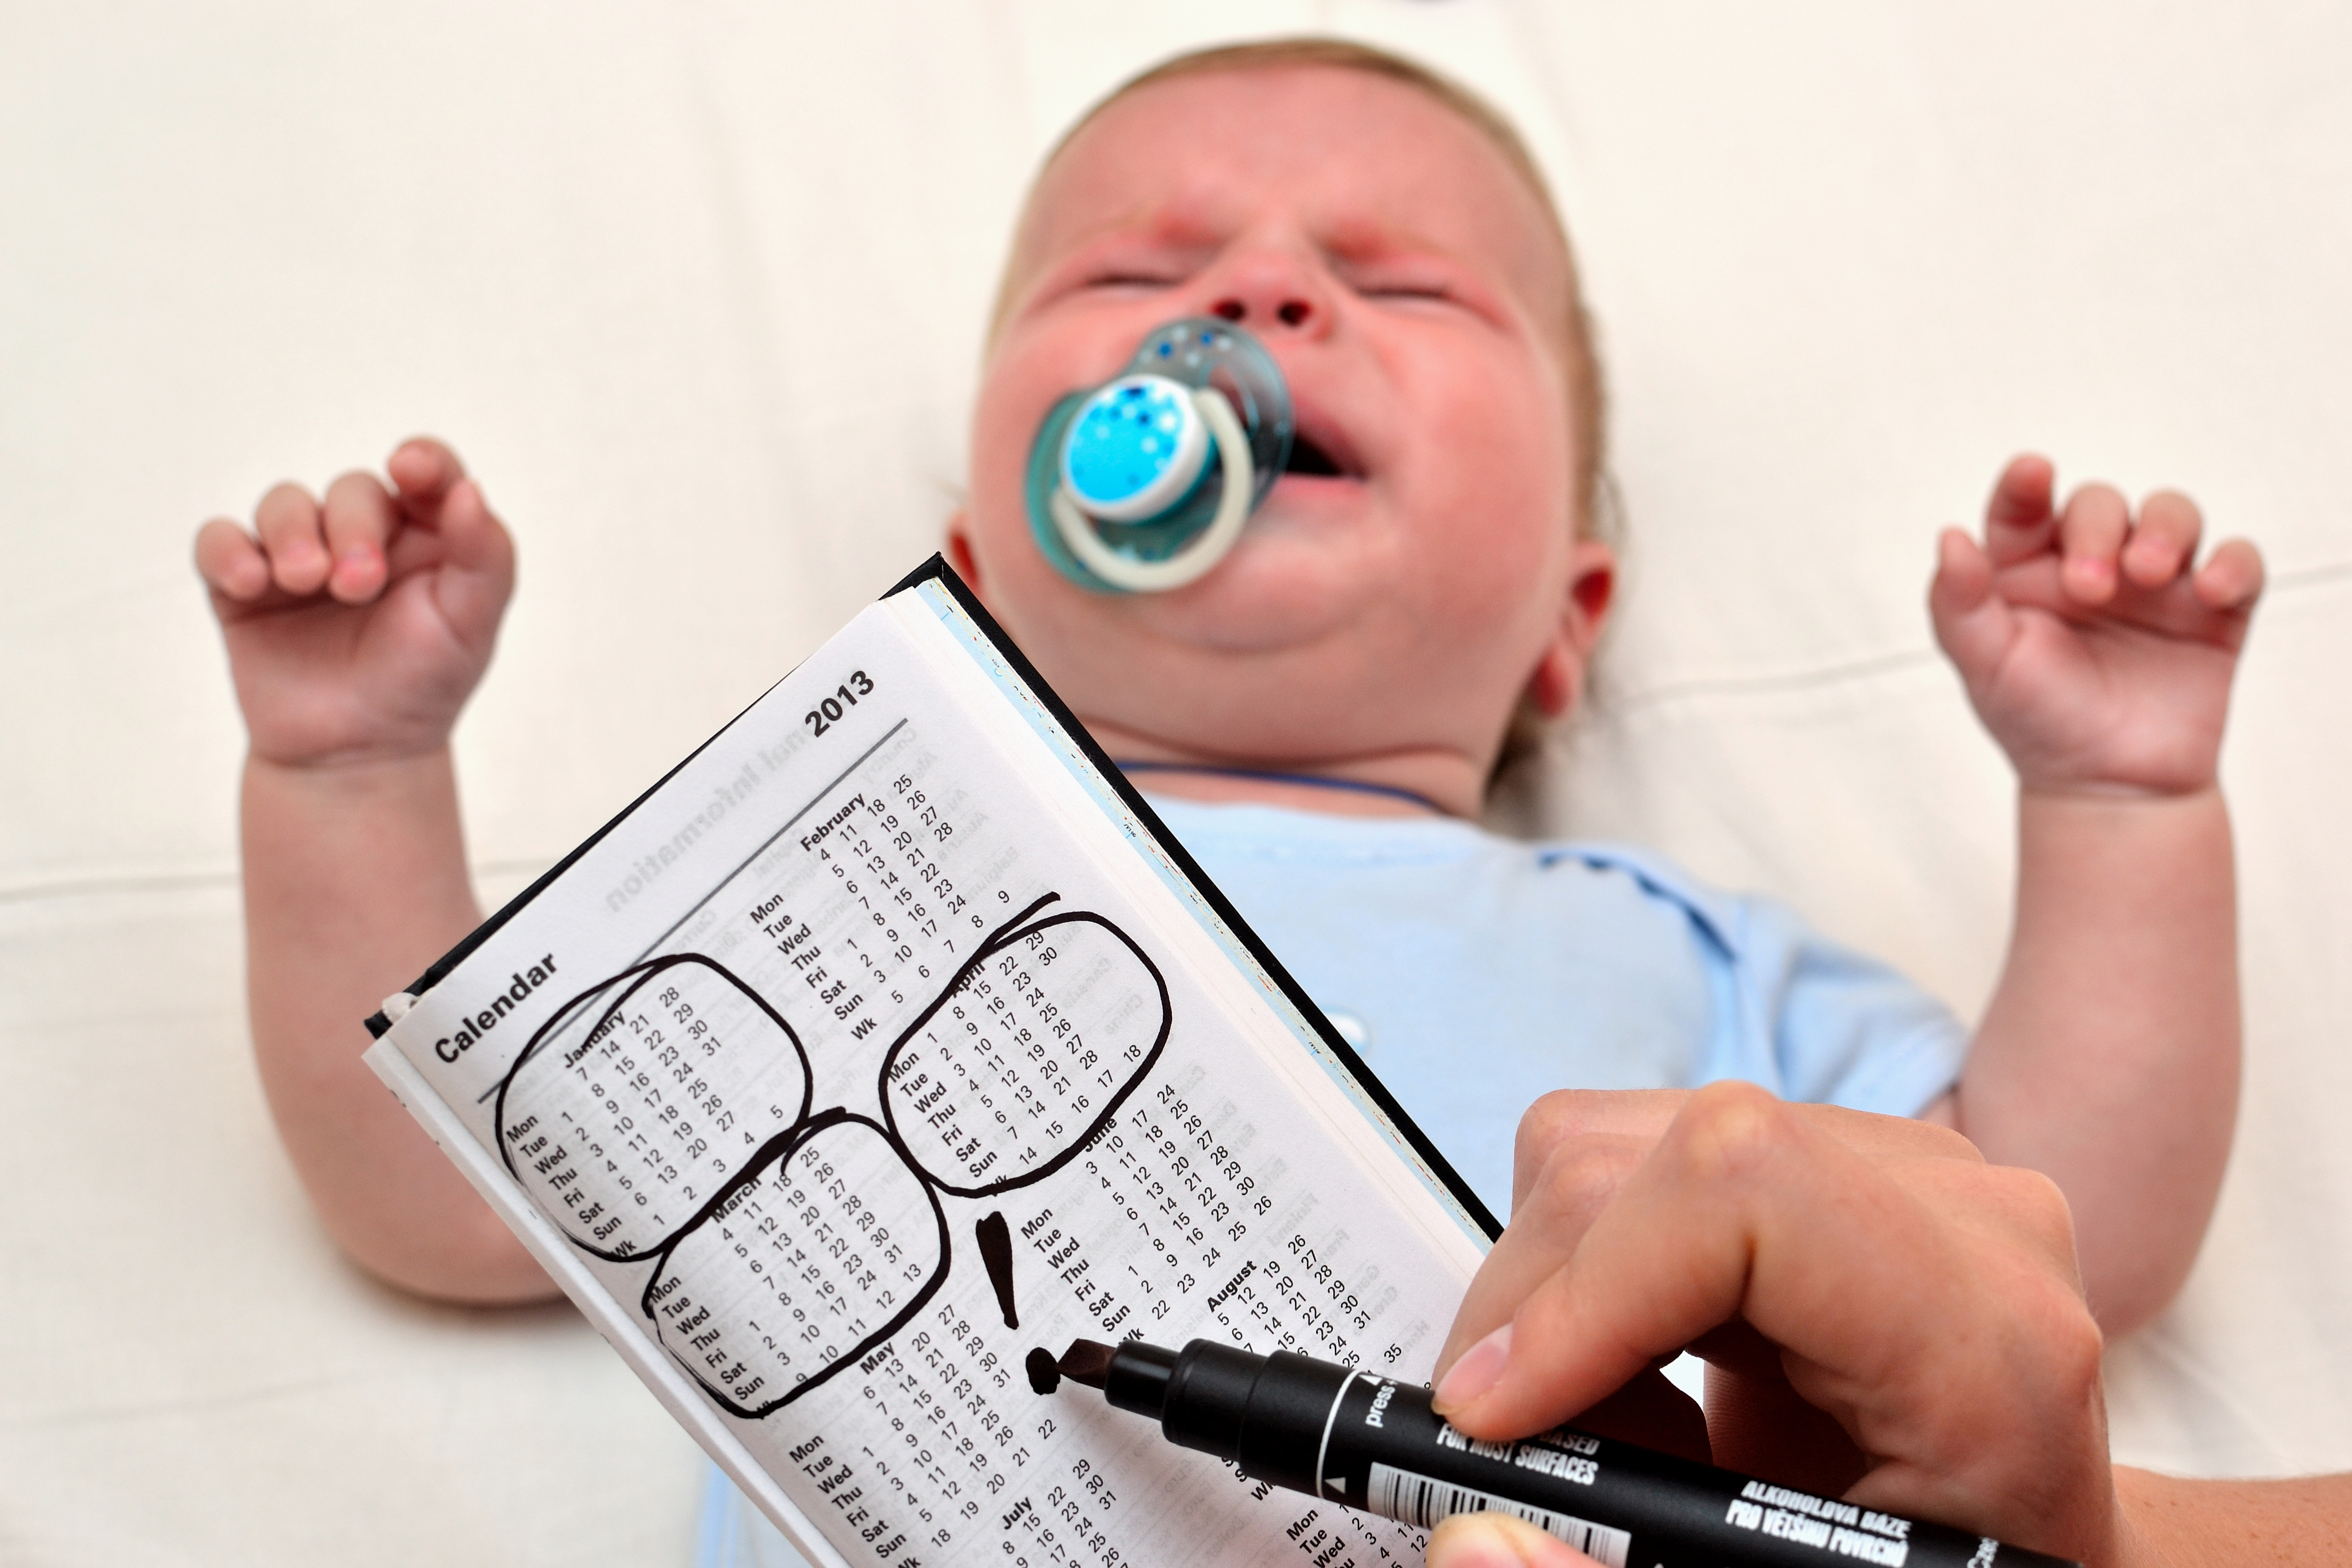 Knowing how to treat colic